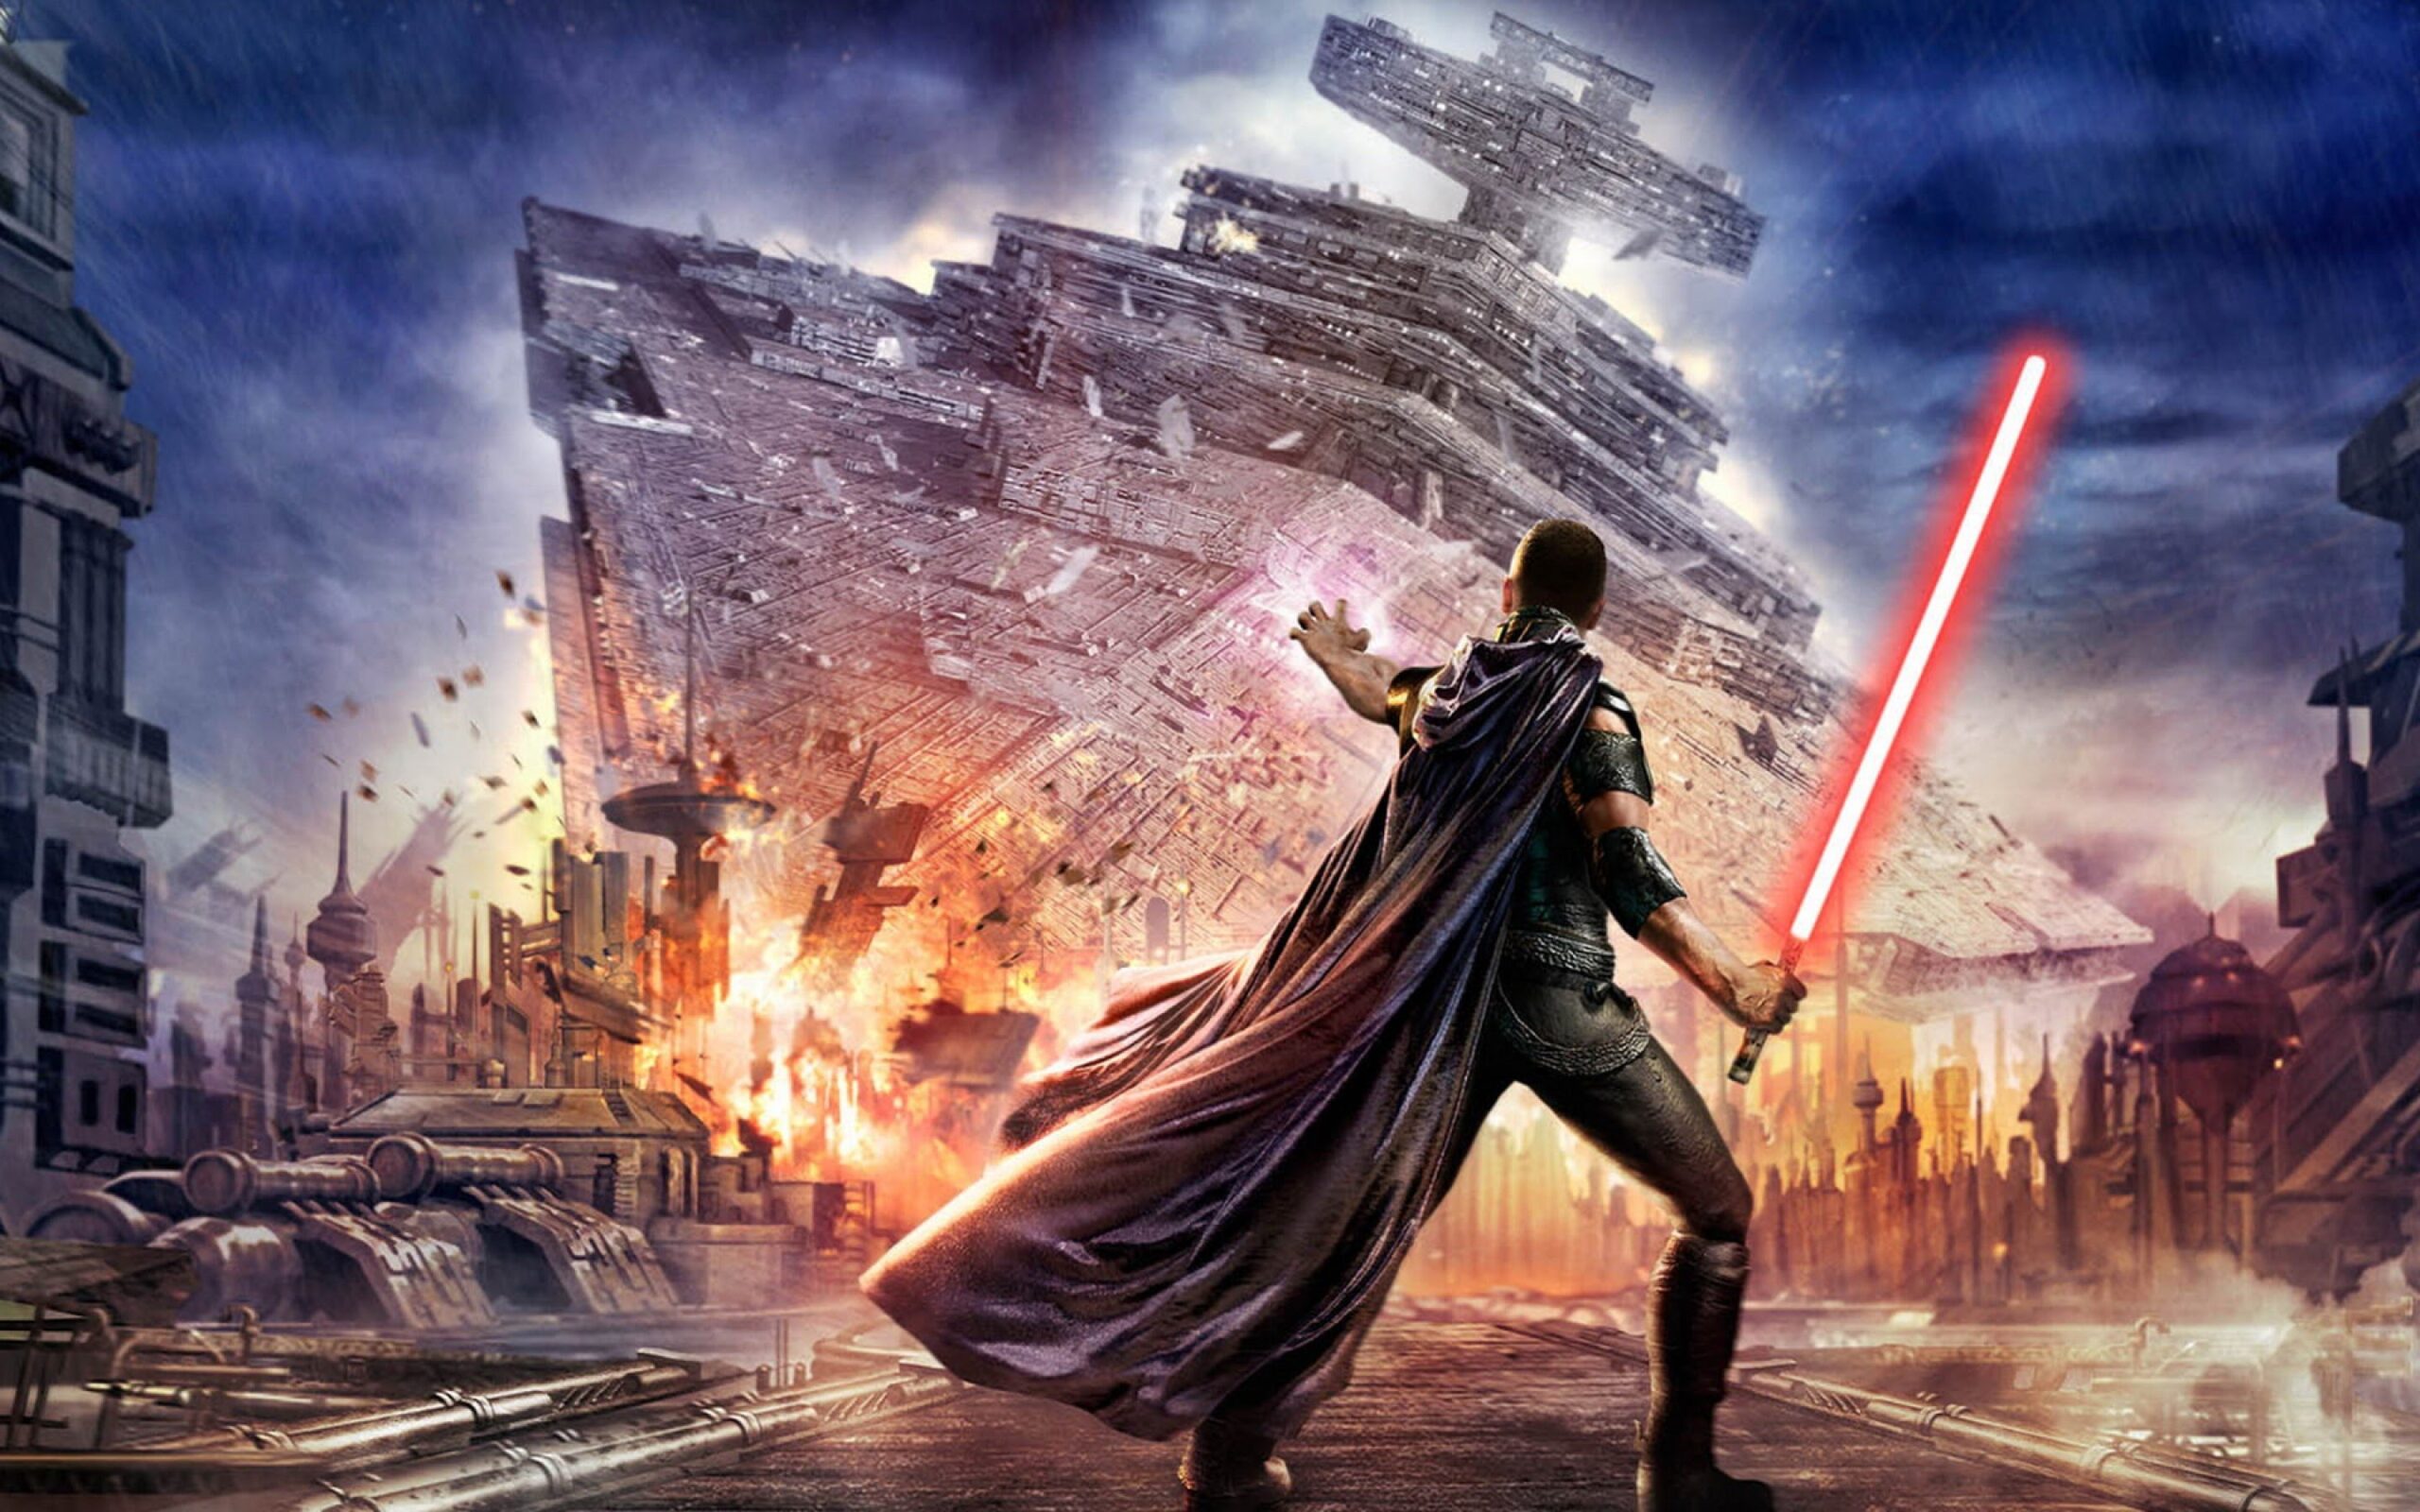 Star Wars: The Force Unleashed has a story that is a Secret Movie